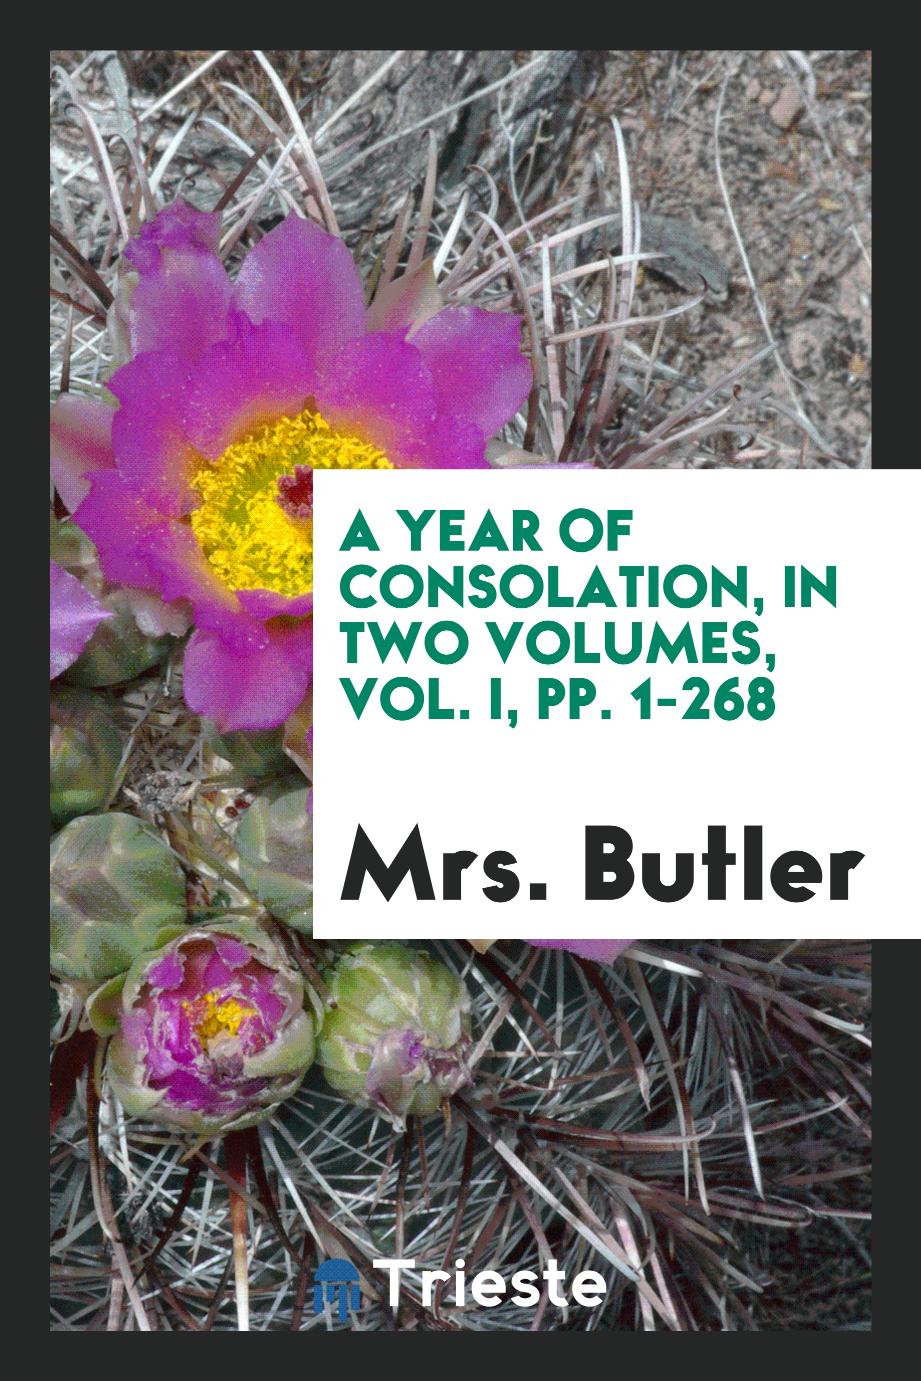 A Year of Consolation, in Two Volumes, Vol. I, pp. 1-268